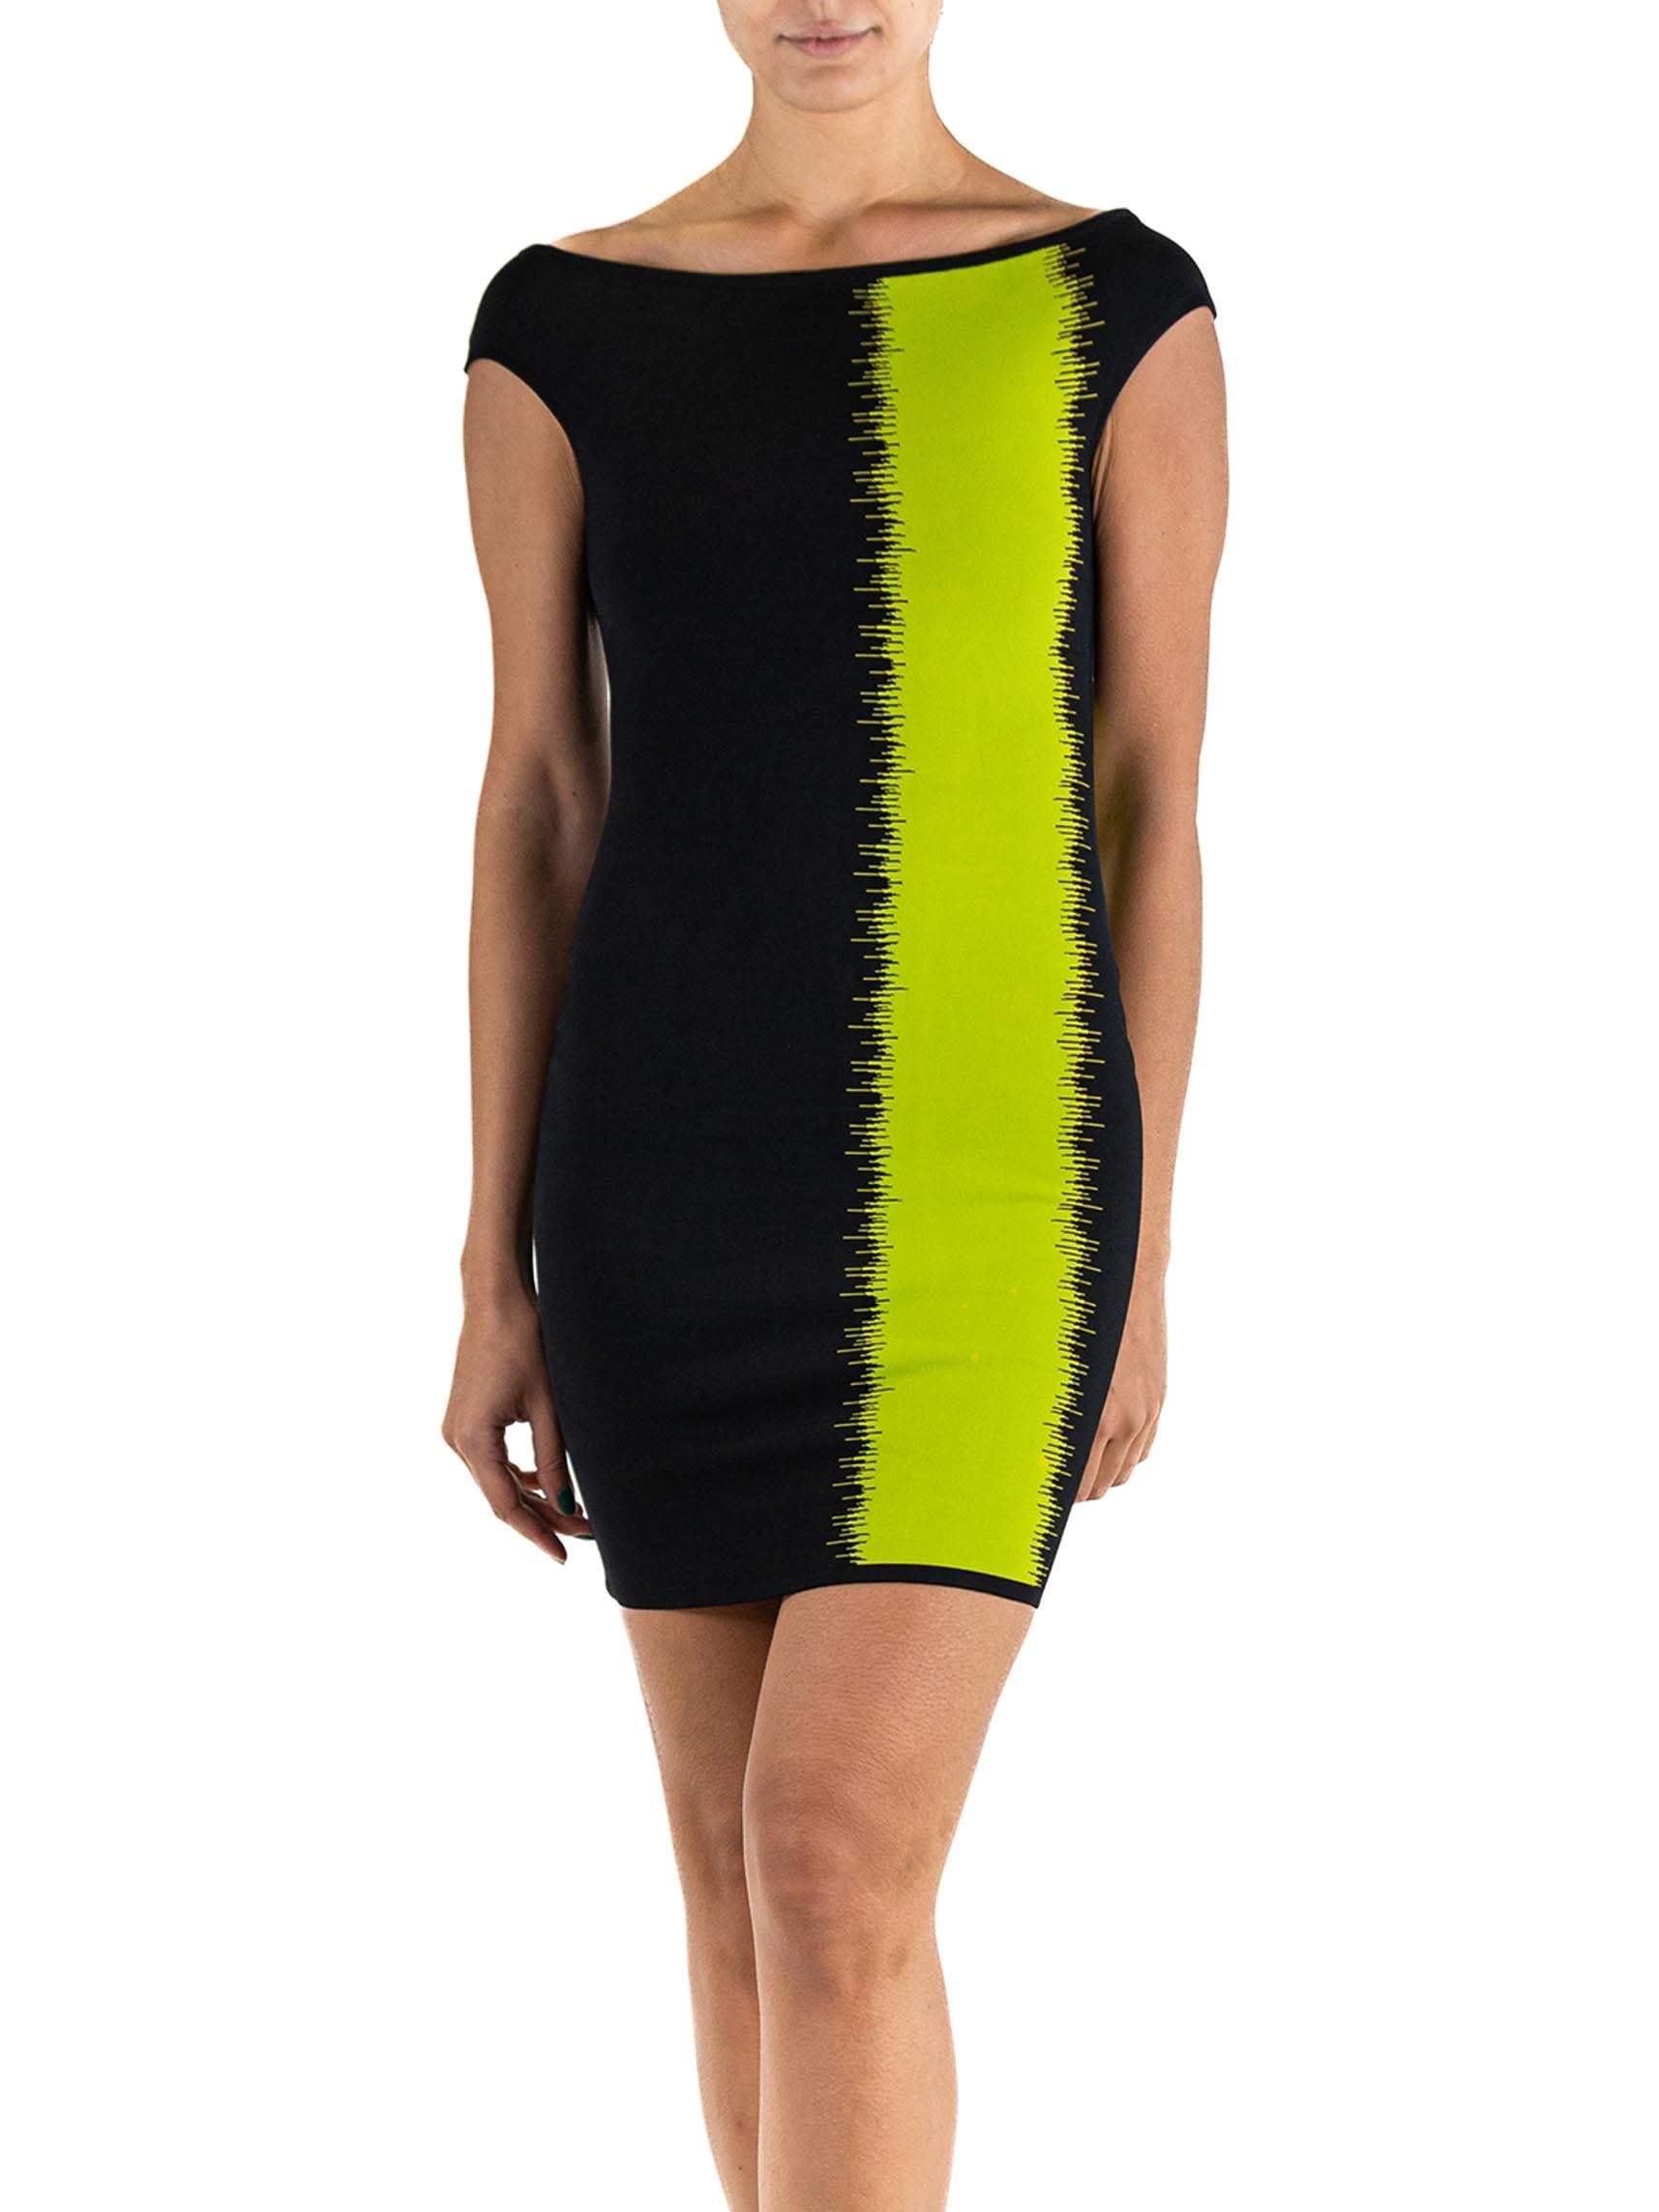 1990S HERVE LEGER Black & Green Rayon Blend Body-Con Cocktail Dress For Sale 3